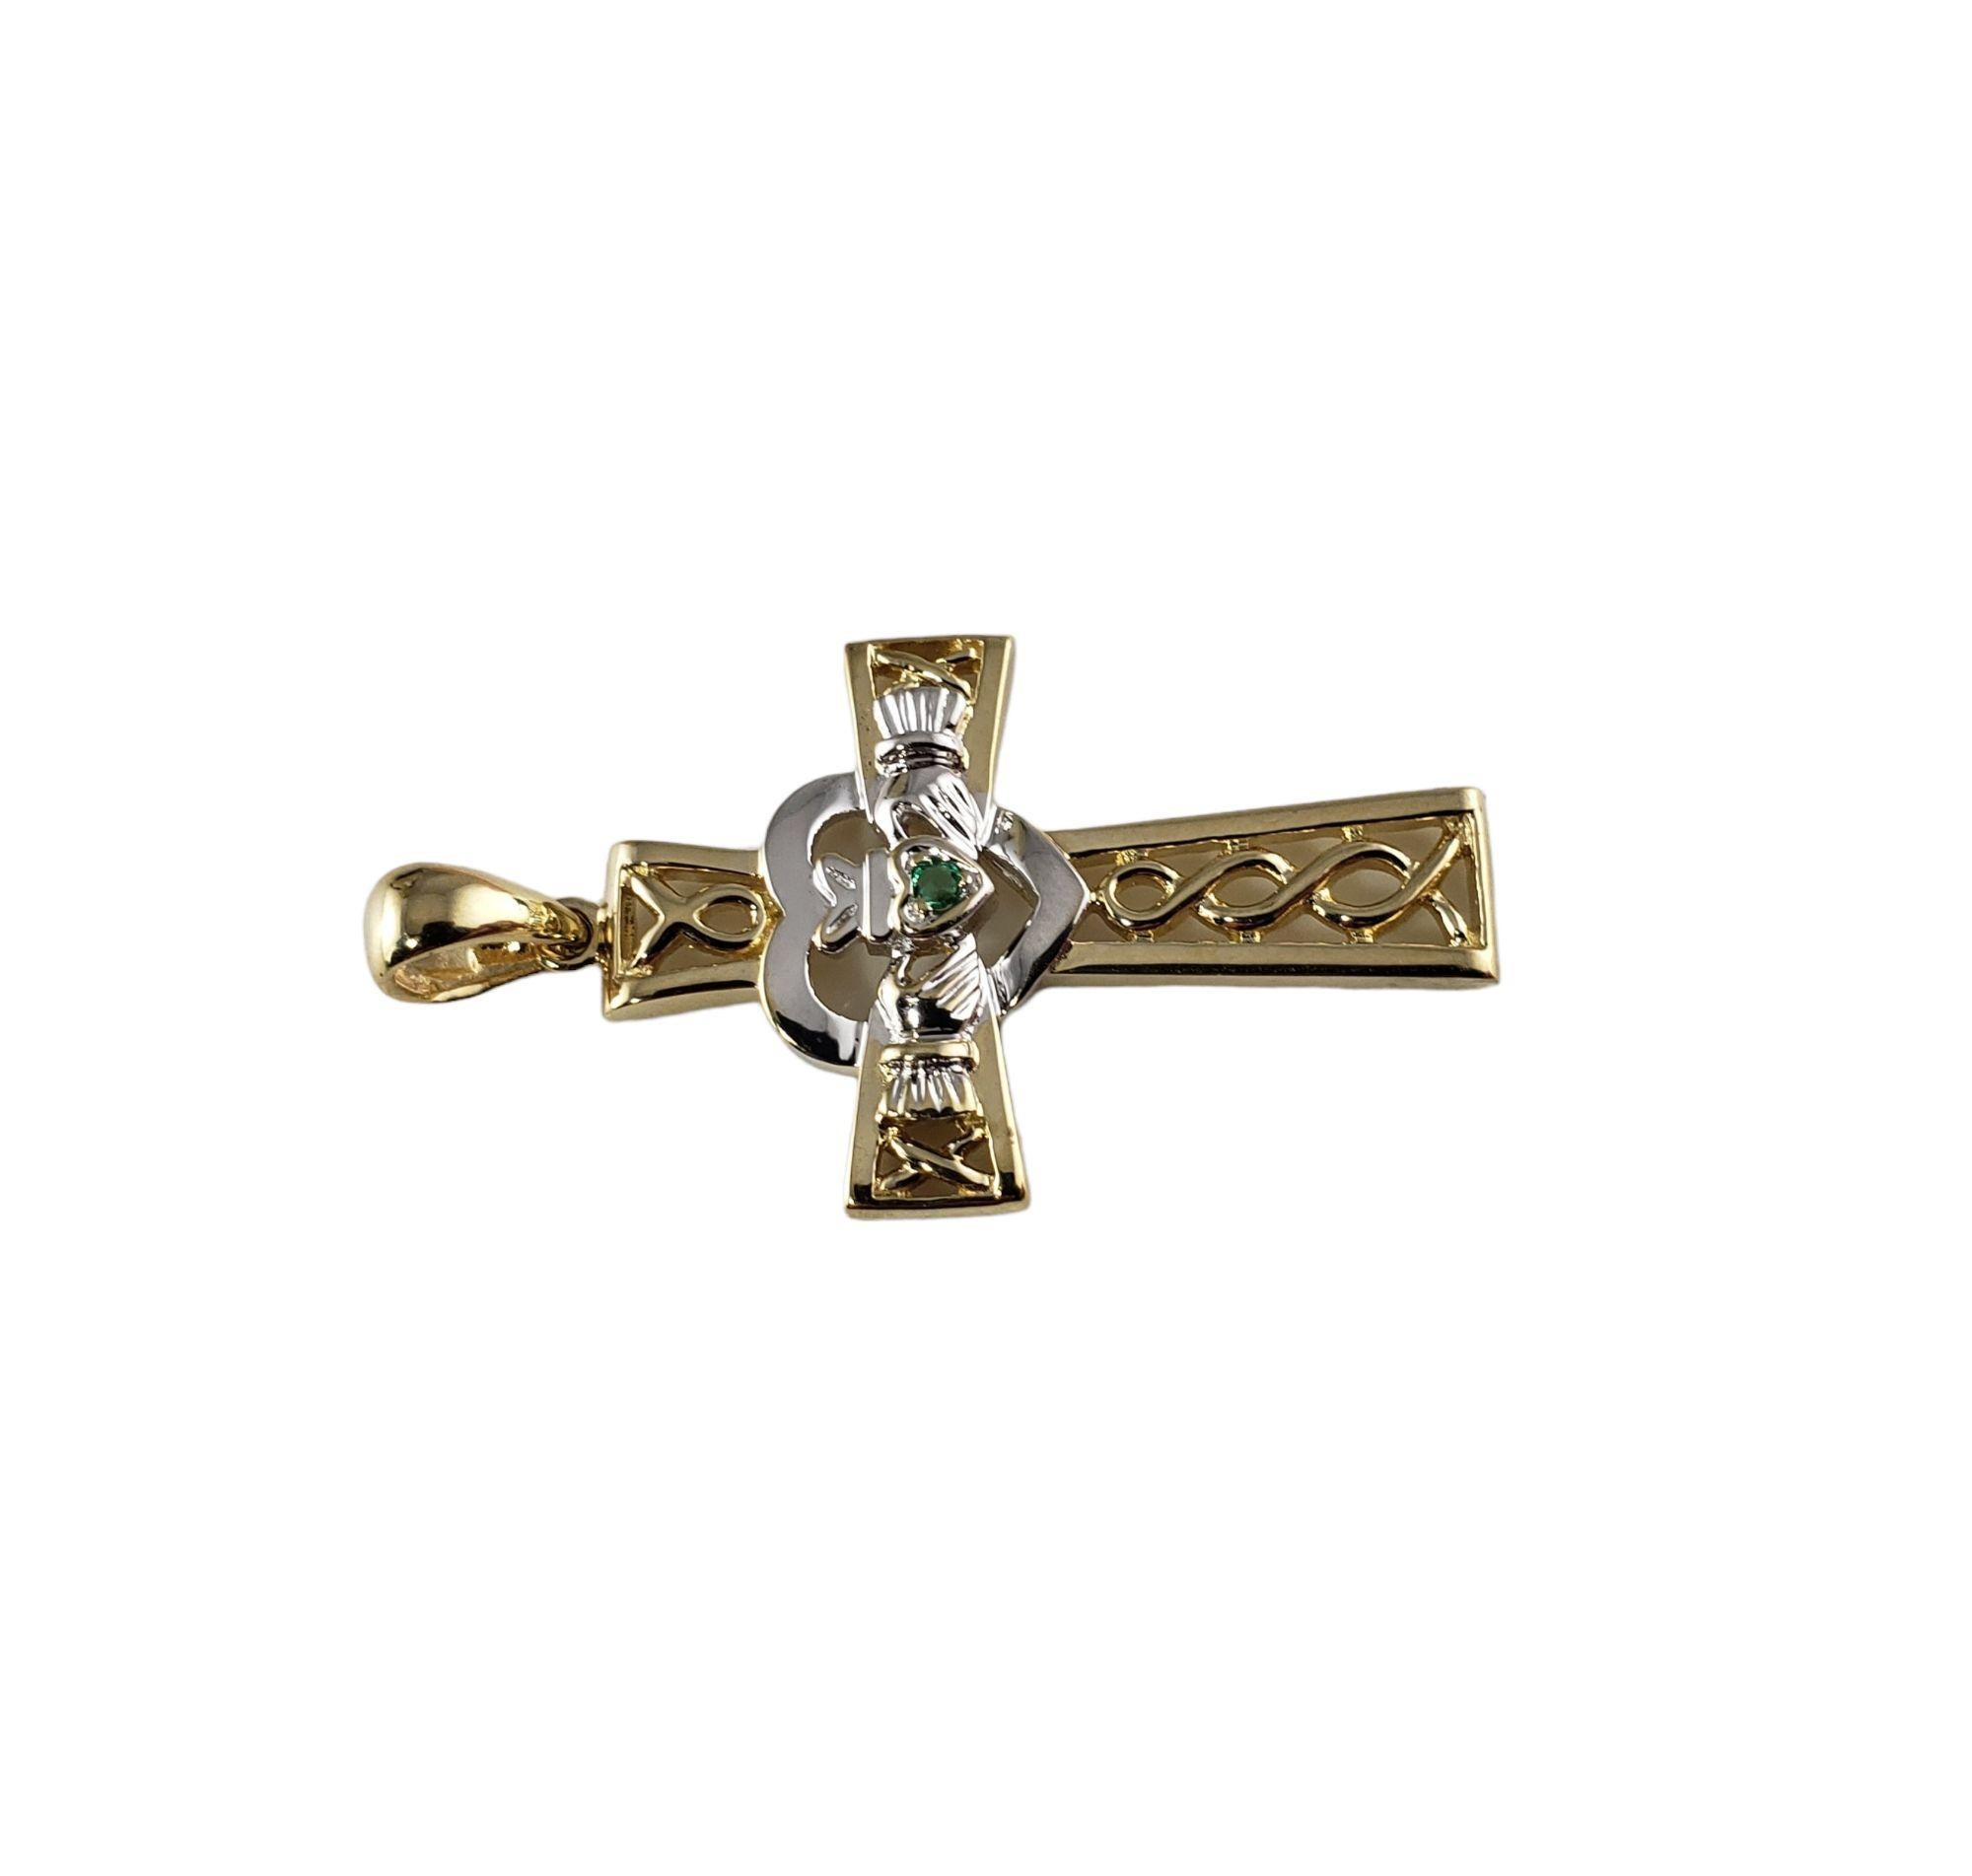 Vintage 14 Karat Yellow and White Gold Claddagh Cross Pendant-

This lovely claddagh cross pendant features one green faceted stone set in beautifully detailed 14K yellow and white gold.

Size: 30 mm x 20 mm

Weight: 2.3 dwt. / 3.6 gr.

Stamped: